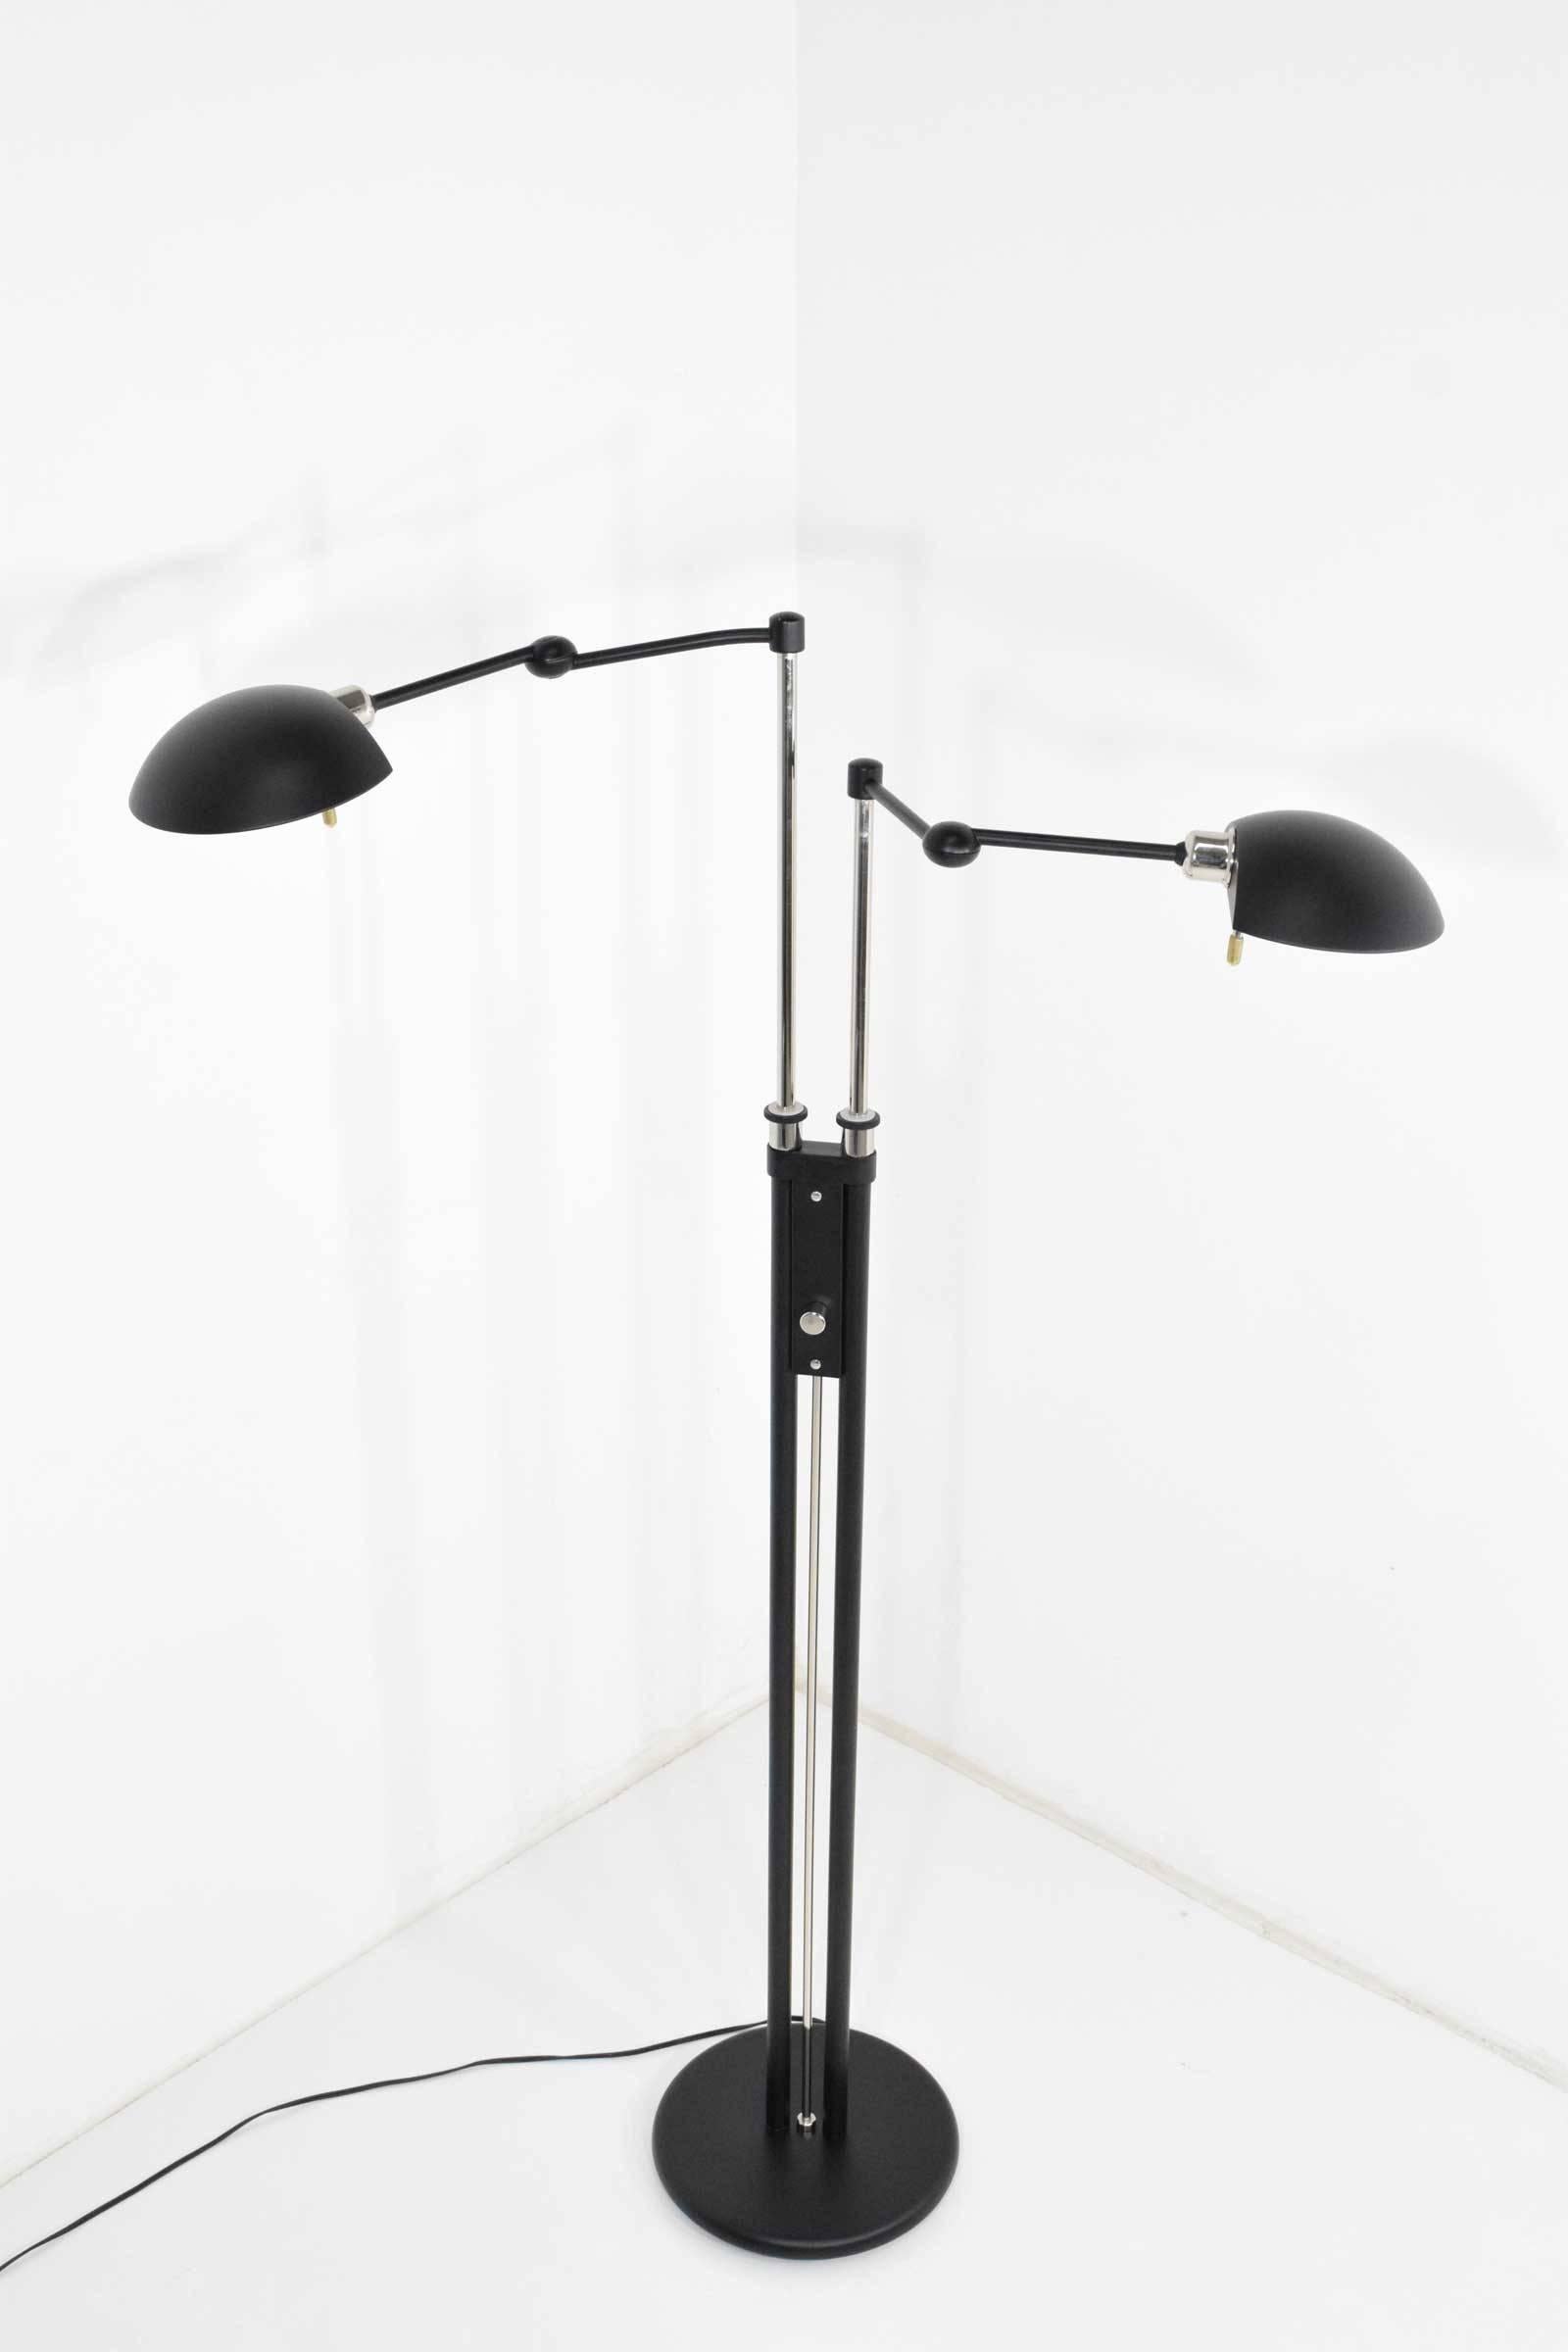 Form and function are fused into one. This twin-light swing lamp is the perfect solution for two light sources in one lamp. Both arms are independently adjustable and dimmable. Vertical adjustment of each arm from 40 to 57 inches with a maximum arm